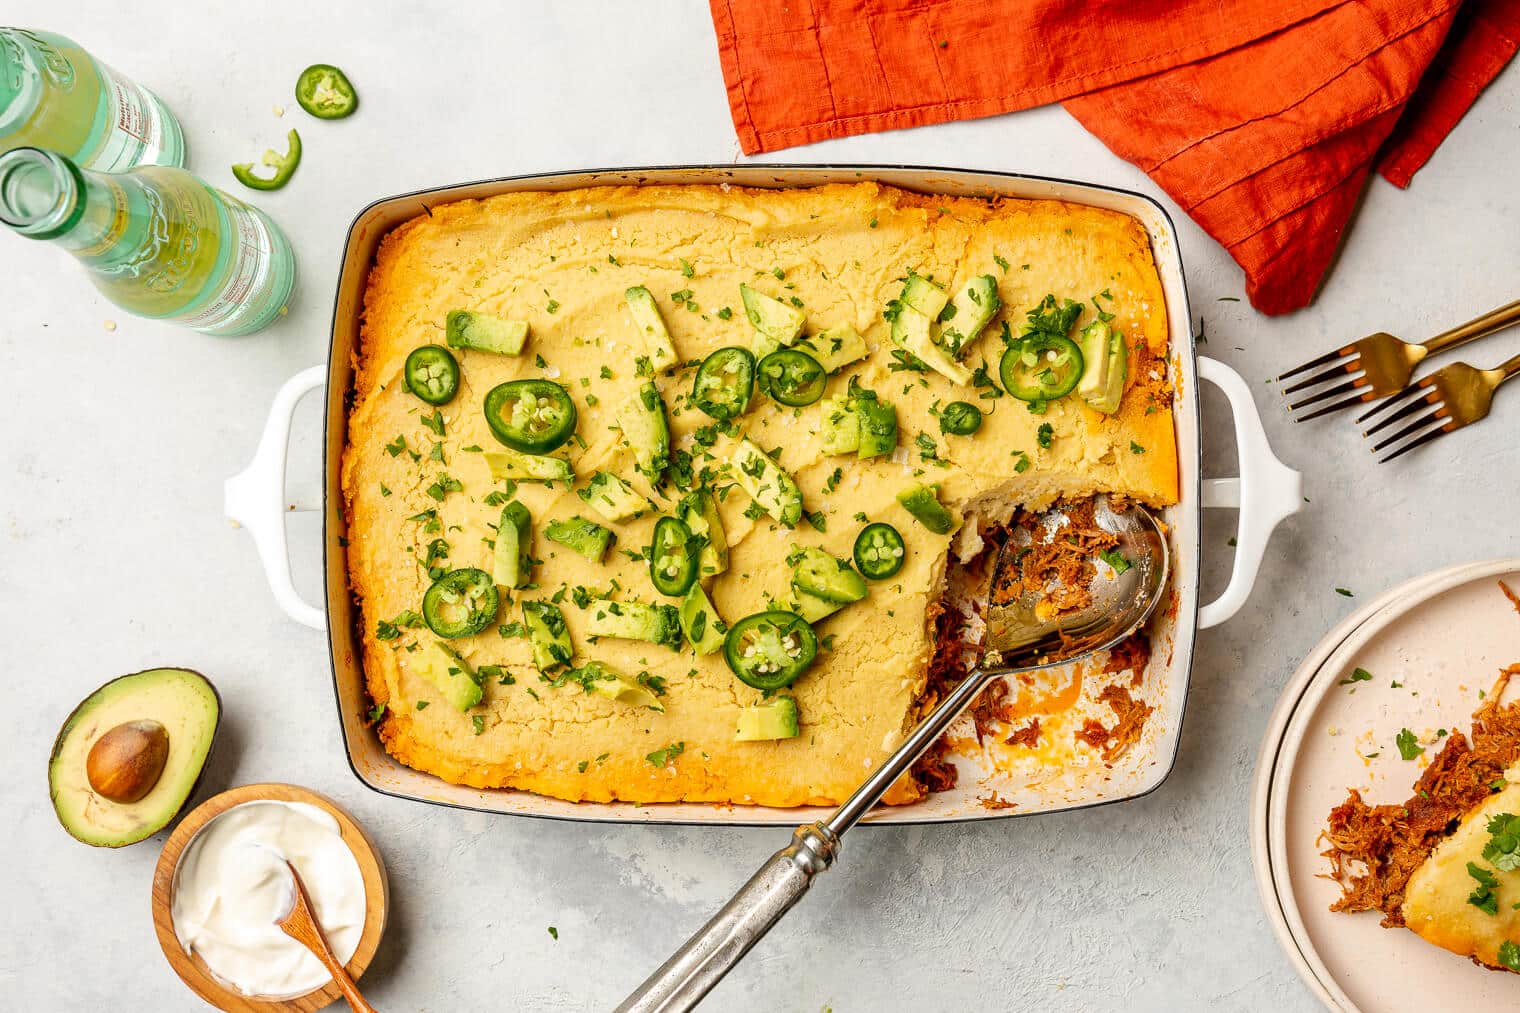 Top down view of tamale pie in a casserole dish on a grey surface. There is a scoop out of the casserole. It's topped with slices of avocado and jalapeno.